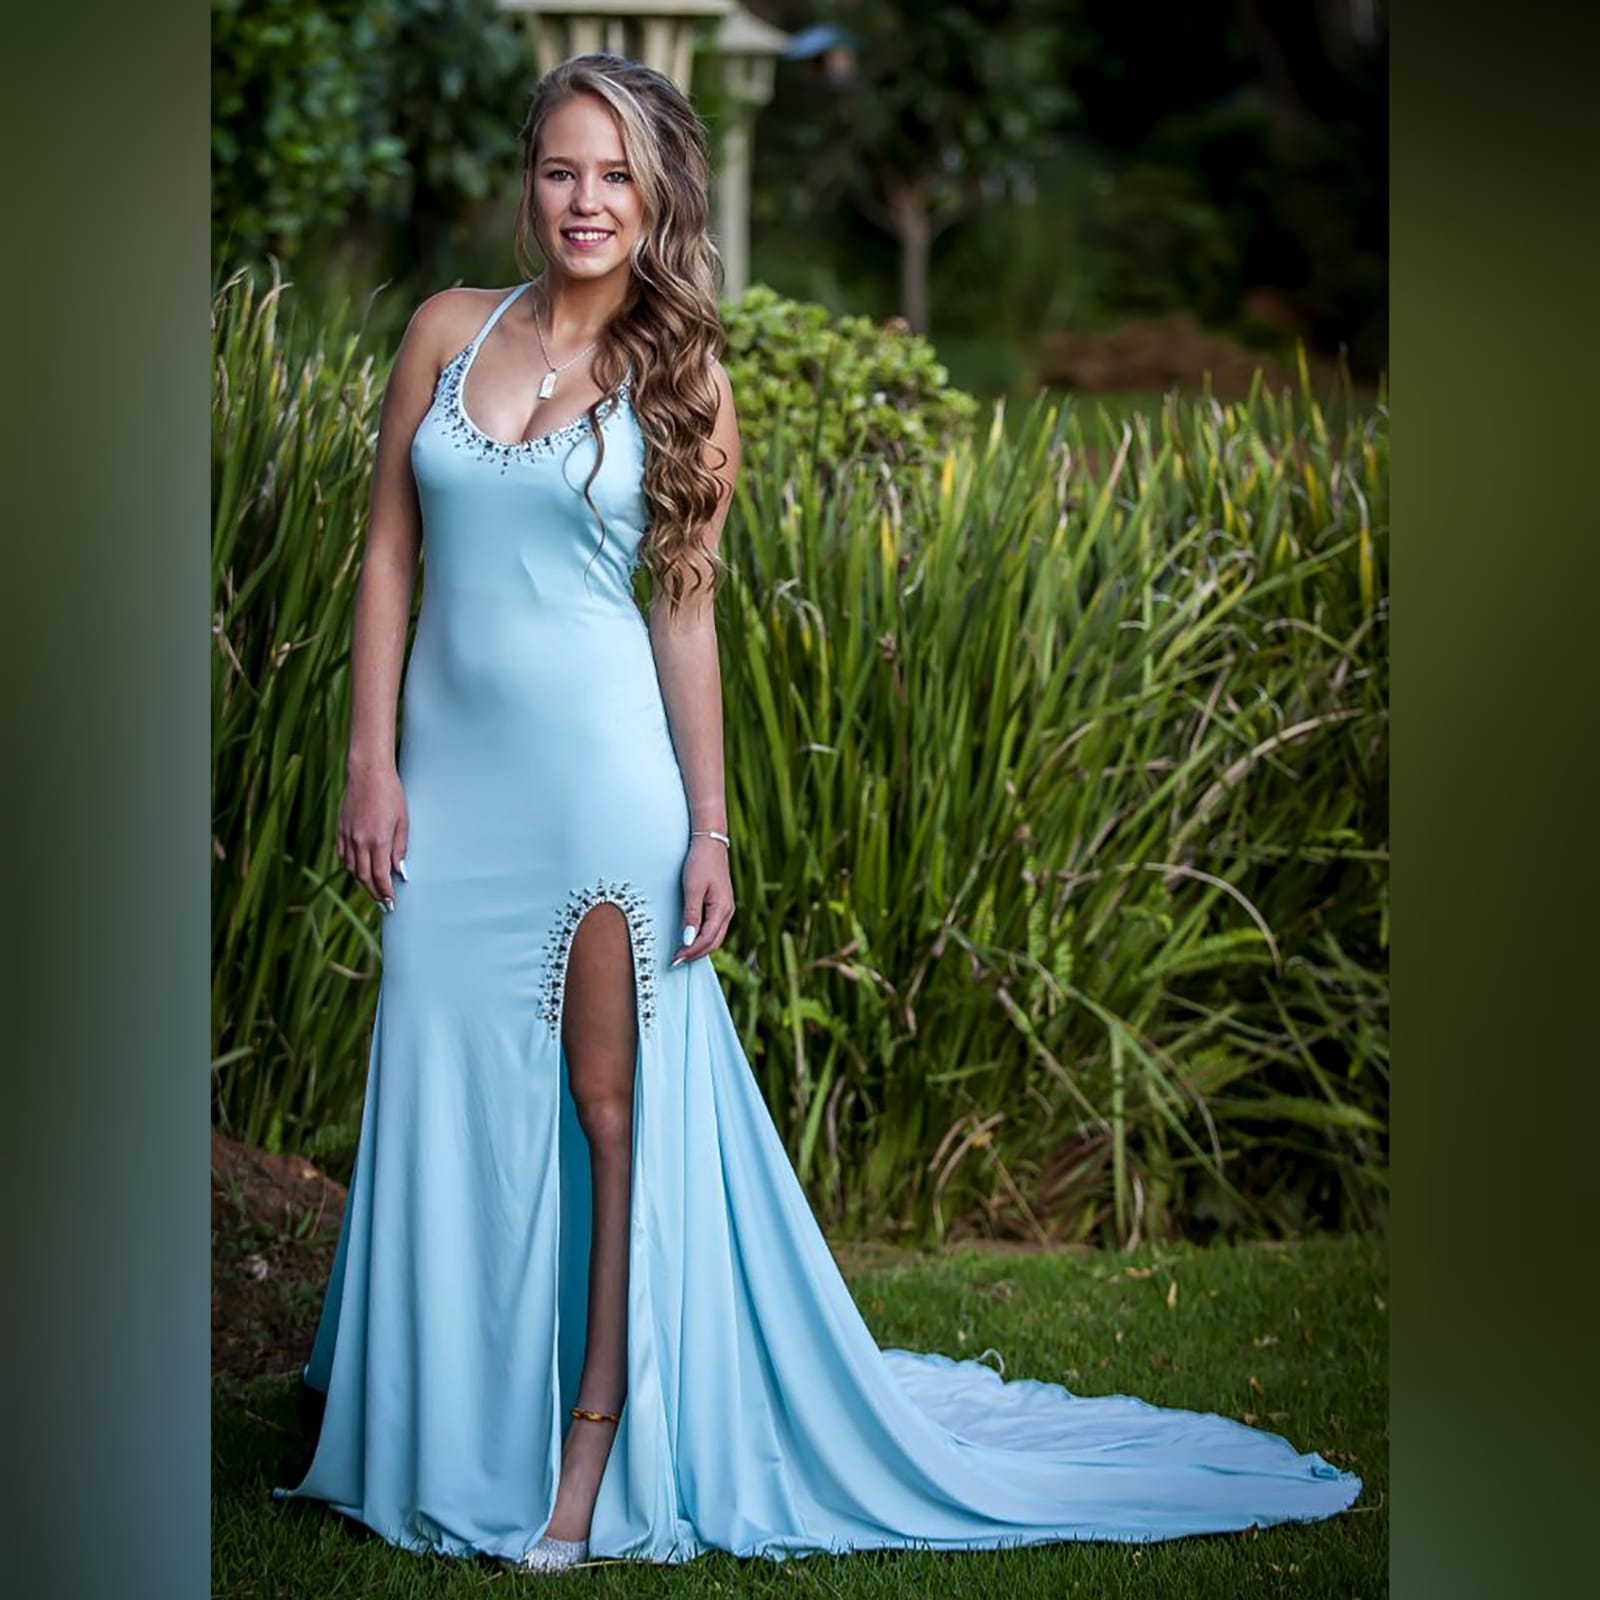 Aqua blue and silver prom dress 7 aqua blue and silver prom dress with a rounded neckline, open low v back with thin crossed straps, slit and a train. Dress detailed with silver beads and stones.